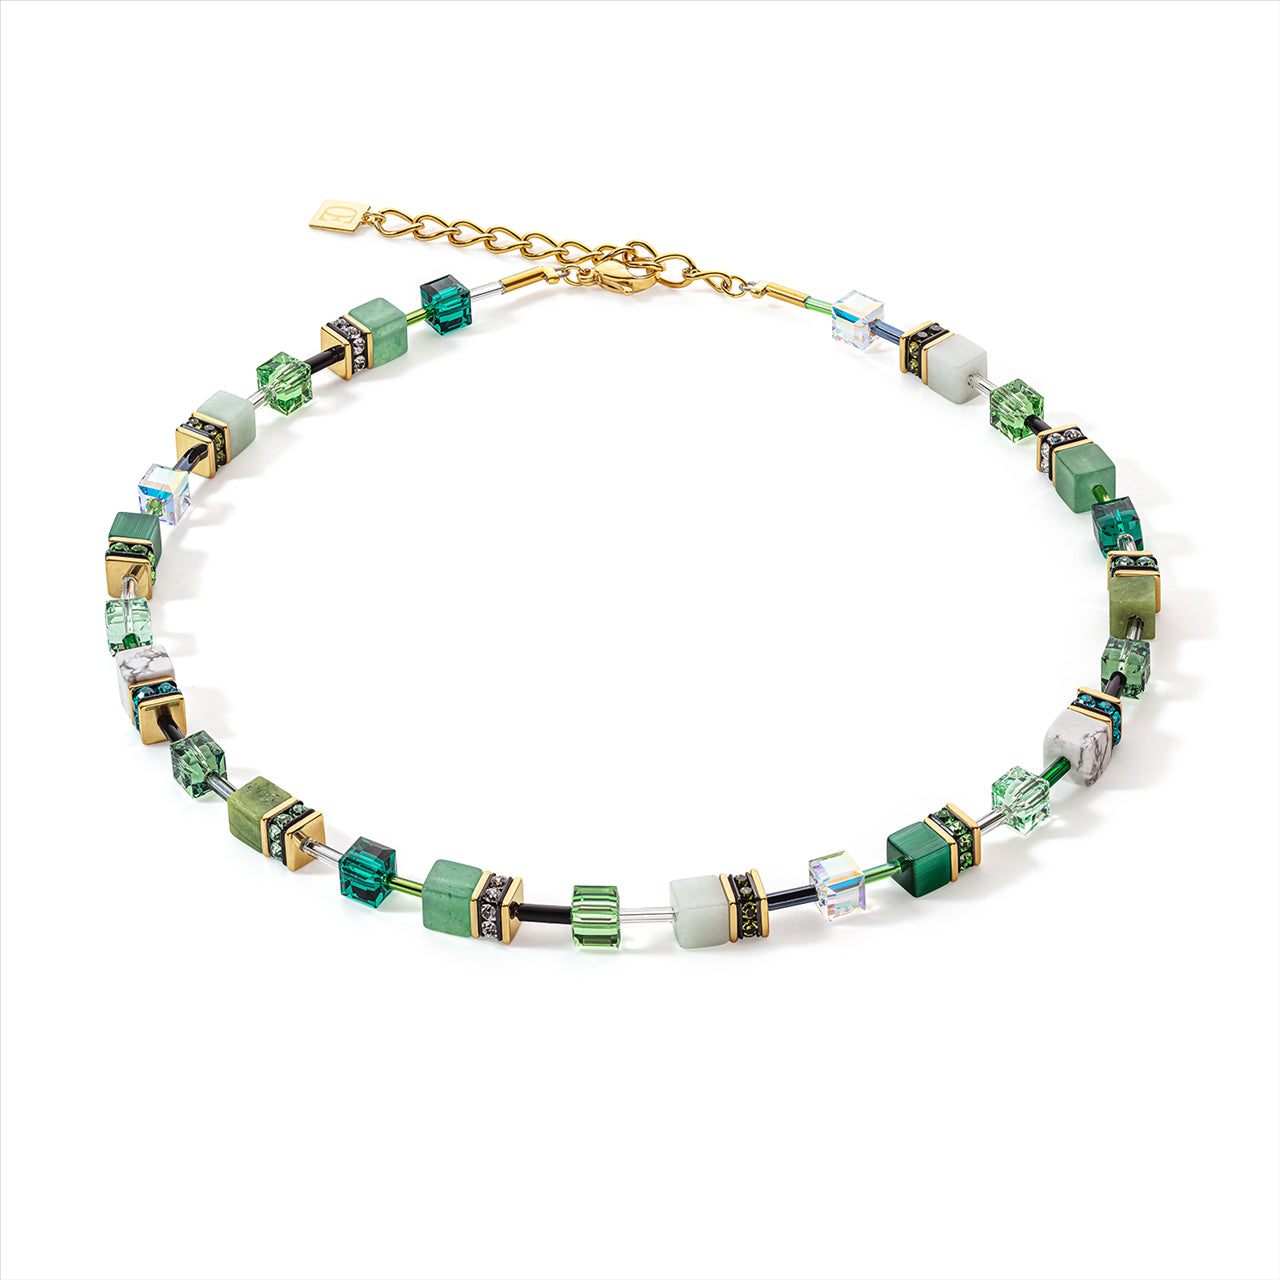 Coeur De Lion - Natural Selection- Necklace Geo-Cube Gld Plt St/St W/Green Aventurine/Howlite/Amazonite/Naphrite/Synthetic Tigers Eye, Rhinestone Rondelles & European Crystals